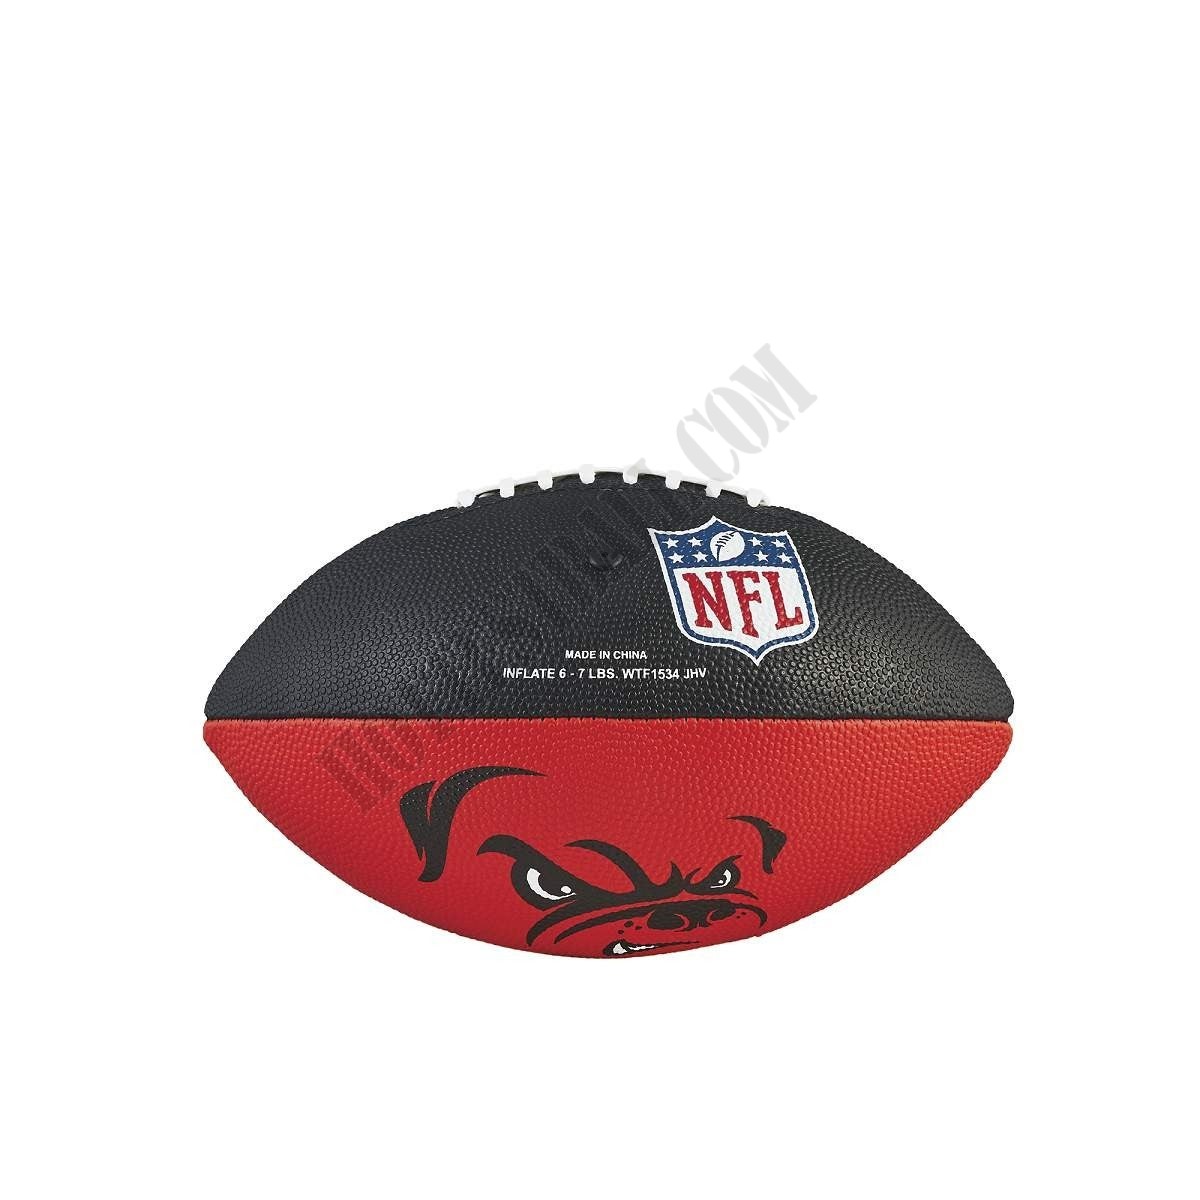 NFL Team Tailgate Football - Cleveland Browns ● Wilson Promotions - -1